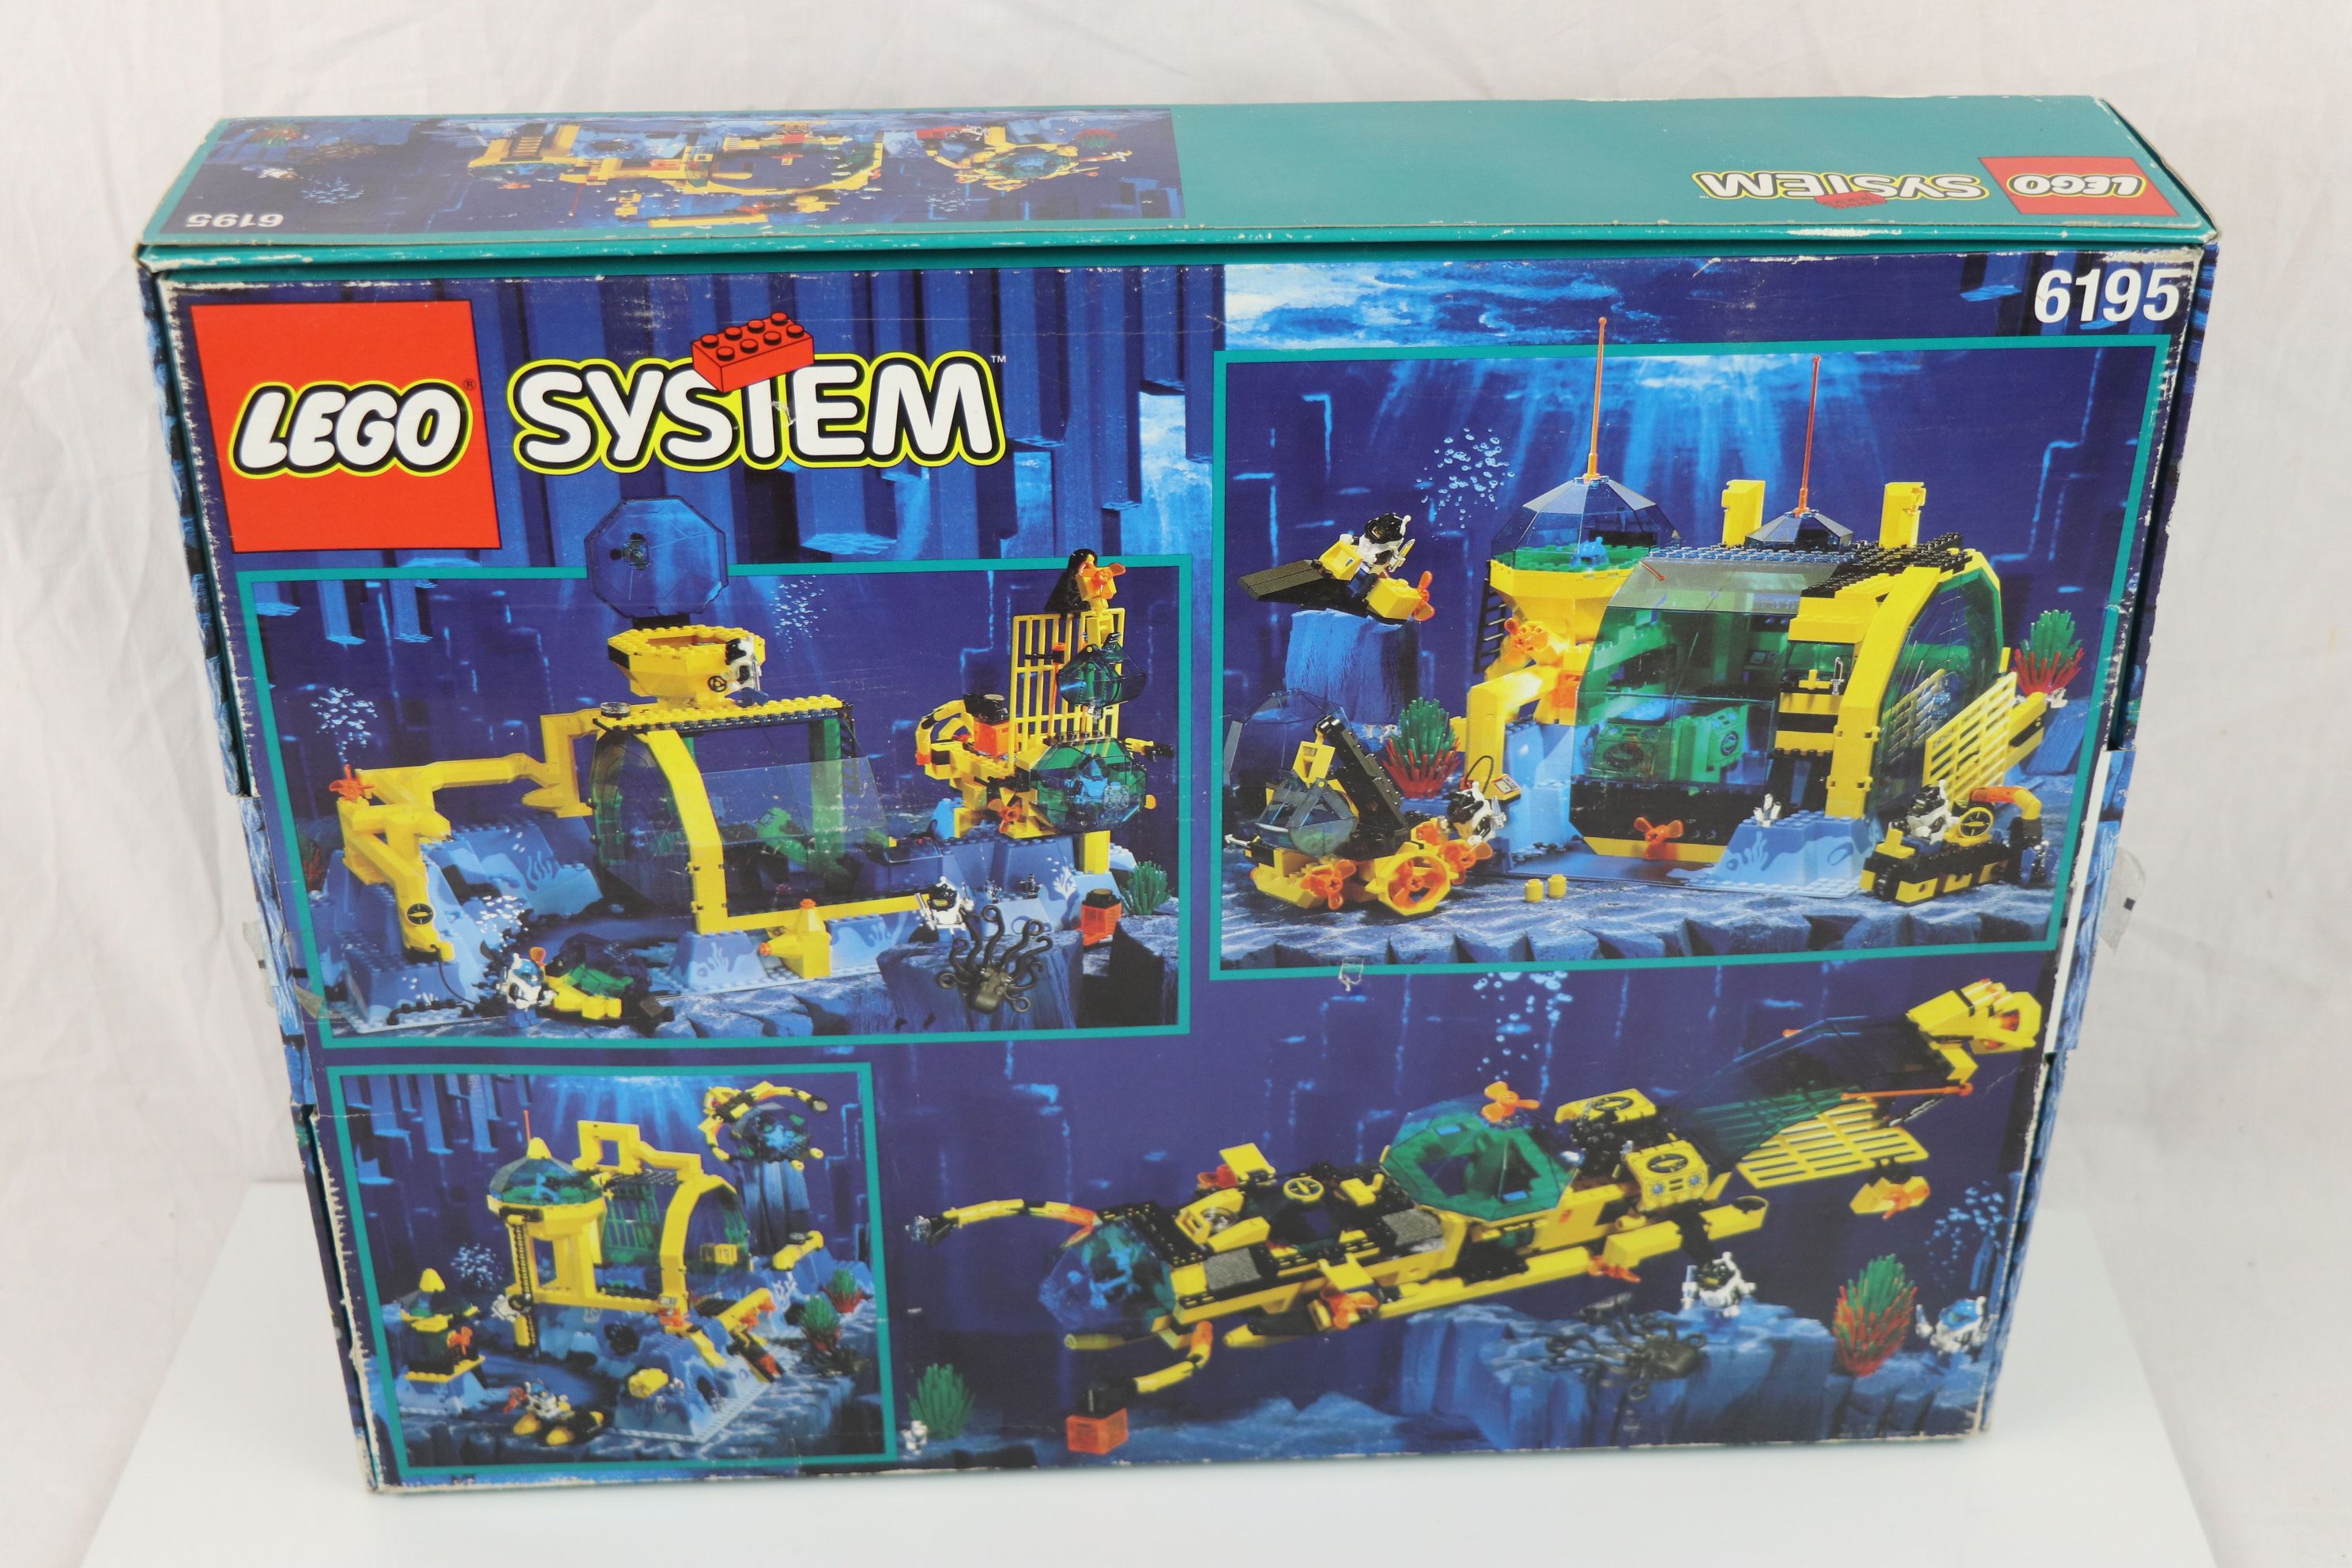 Lego - Boxed Lego System 6195 Aquanauts Neptune Discovery set unchecked but appearing complete - Image 15 of 16